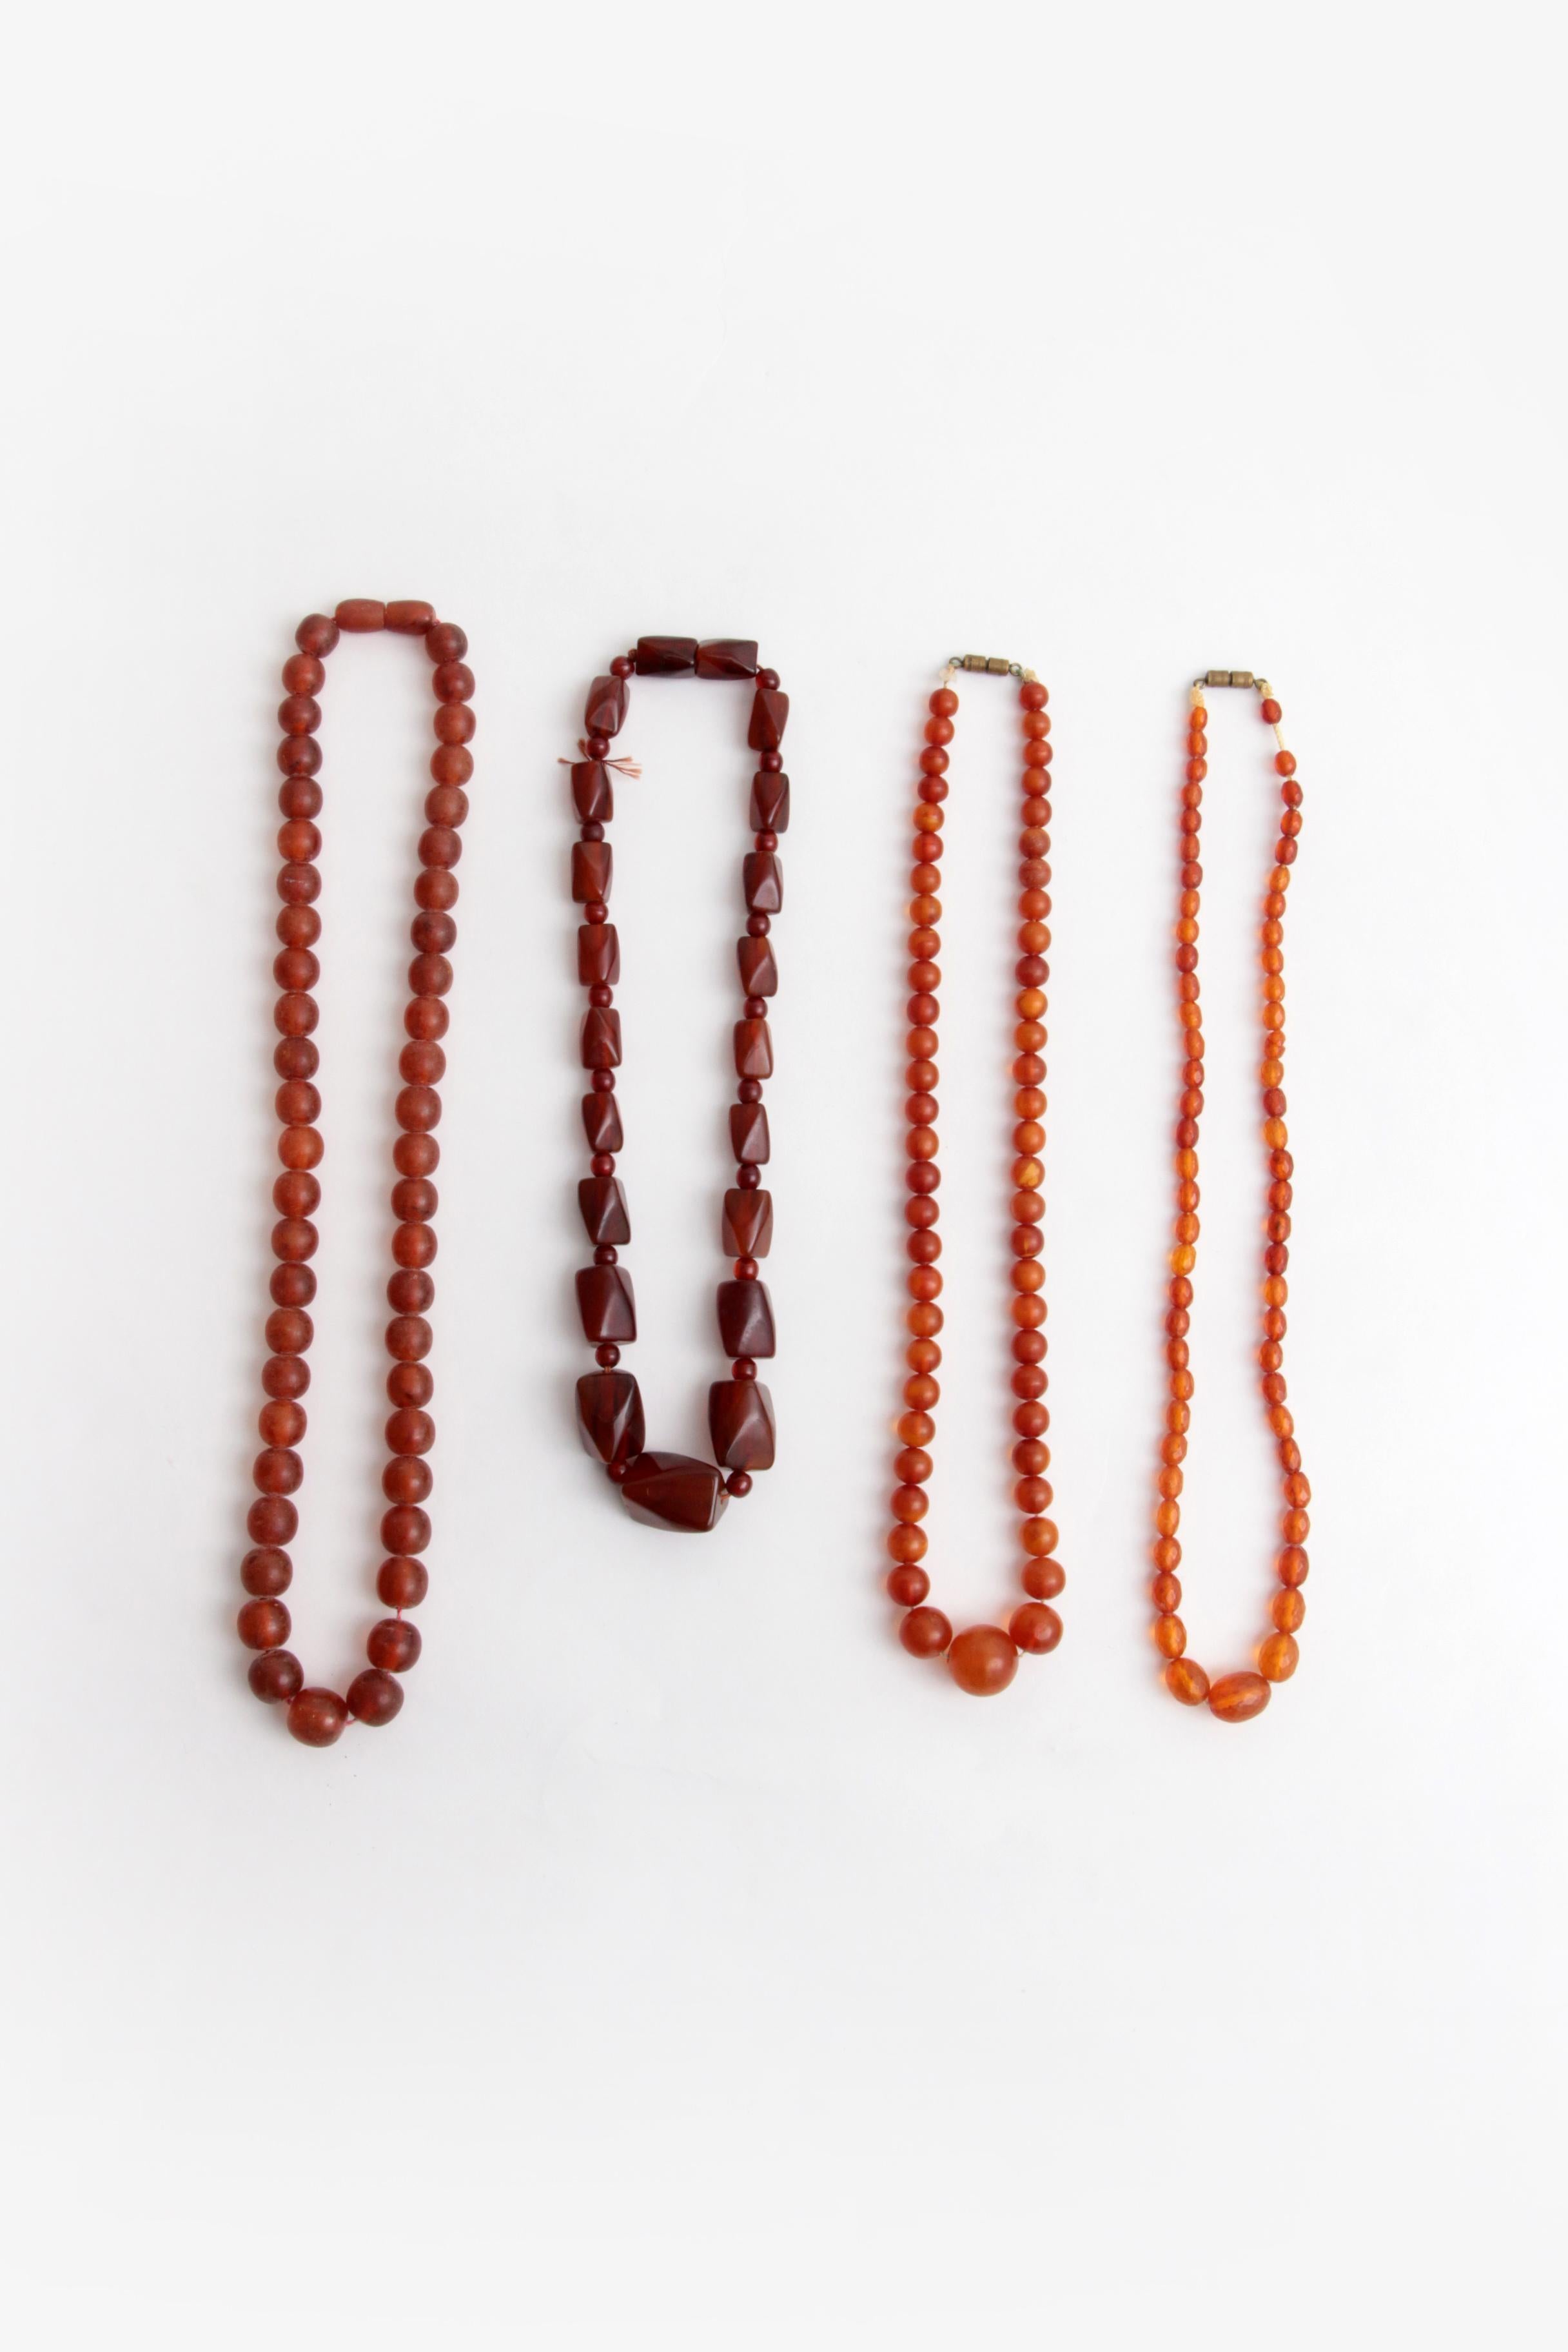 Do you also want to wear something nice and especially something that others don't have, this might be something for you.

These are 4 amber necklaces strung with irregular pieces of amber and beautiful round beads.

The closure also fits very